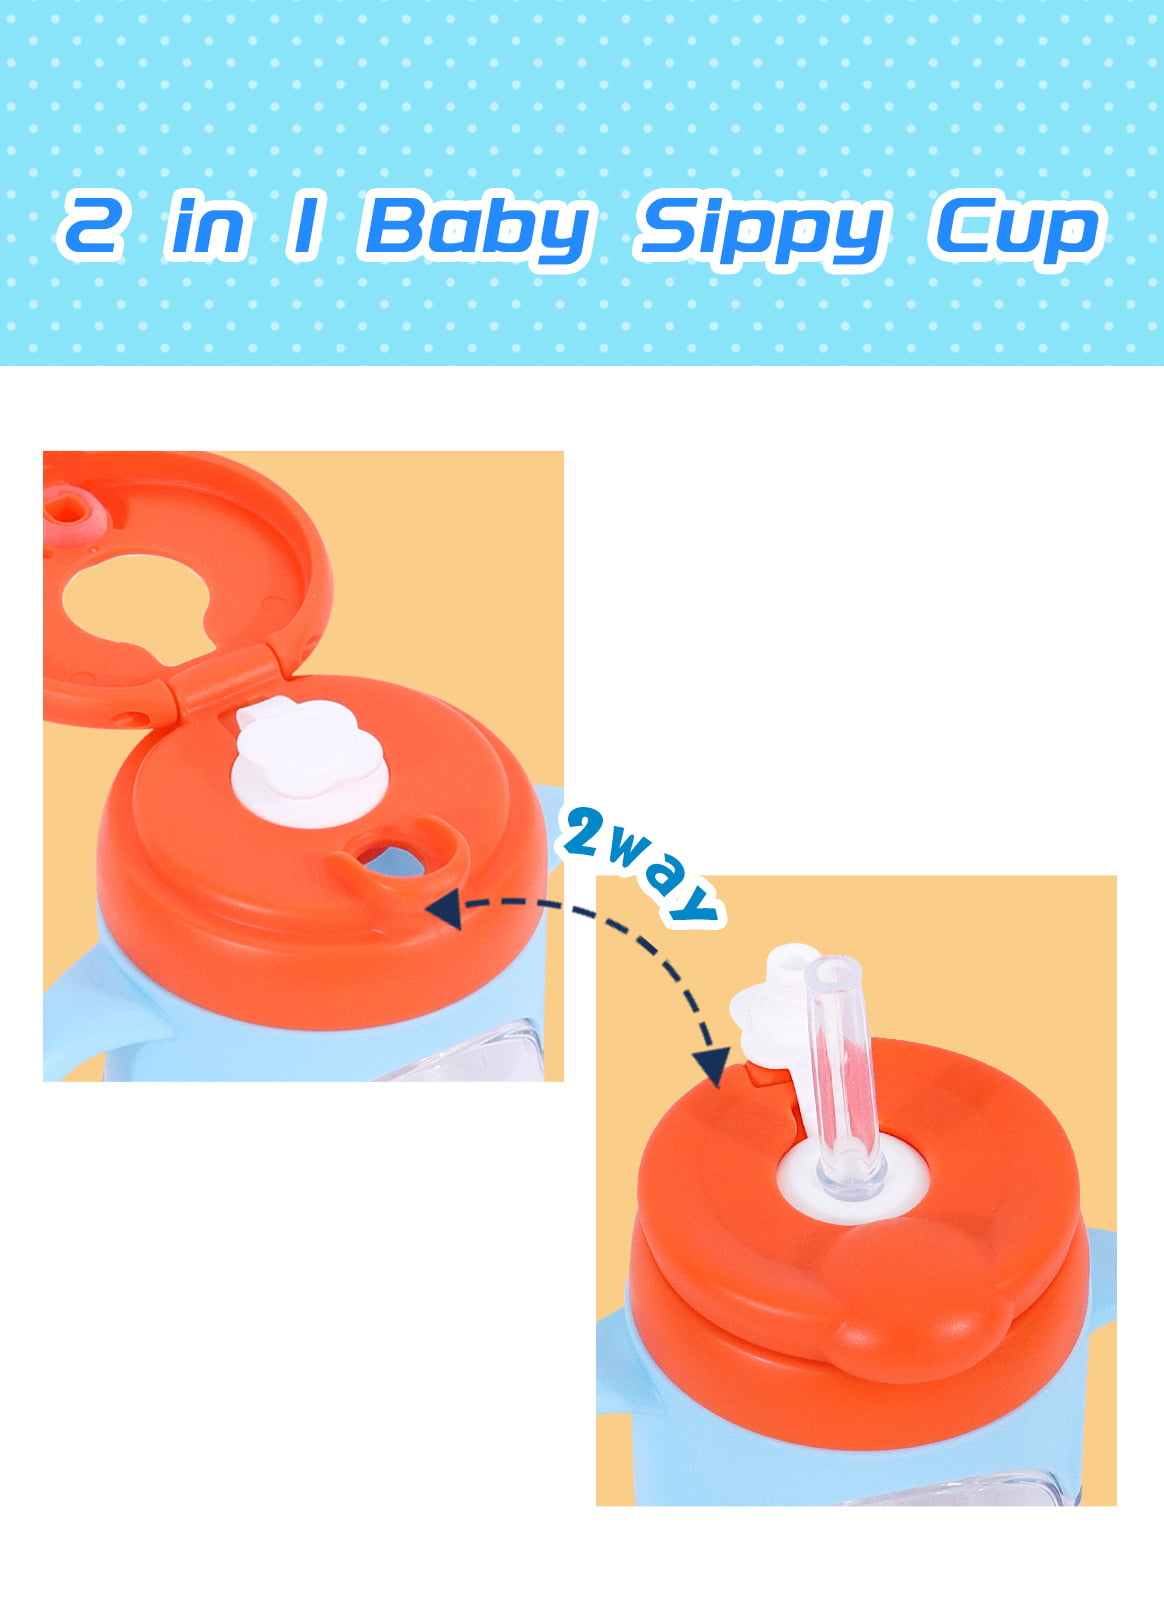 Sippy Cups For 1+ Year Old Unicorn Toddler Cups 2 In 1 With Spout